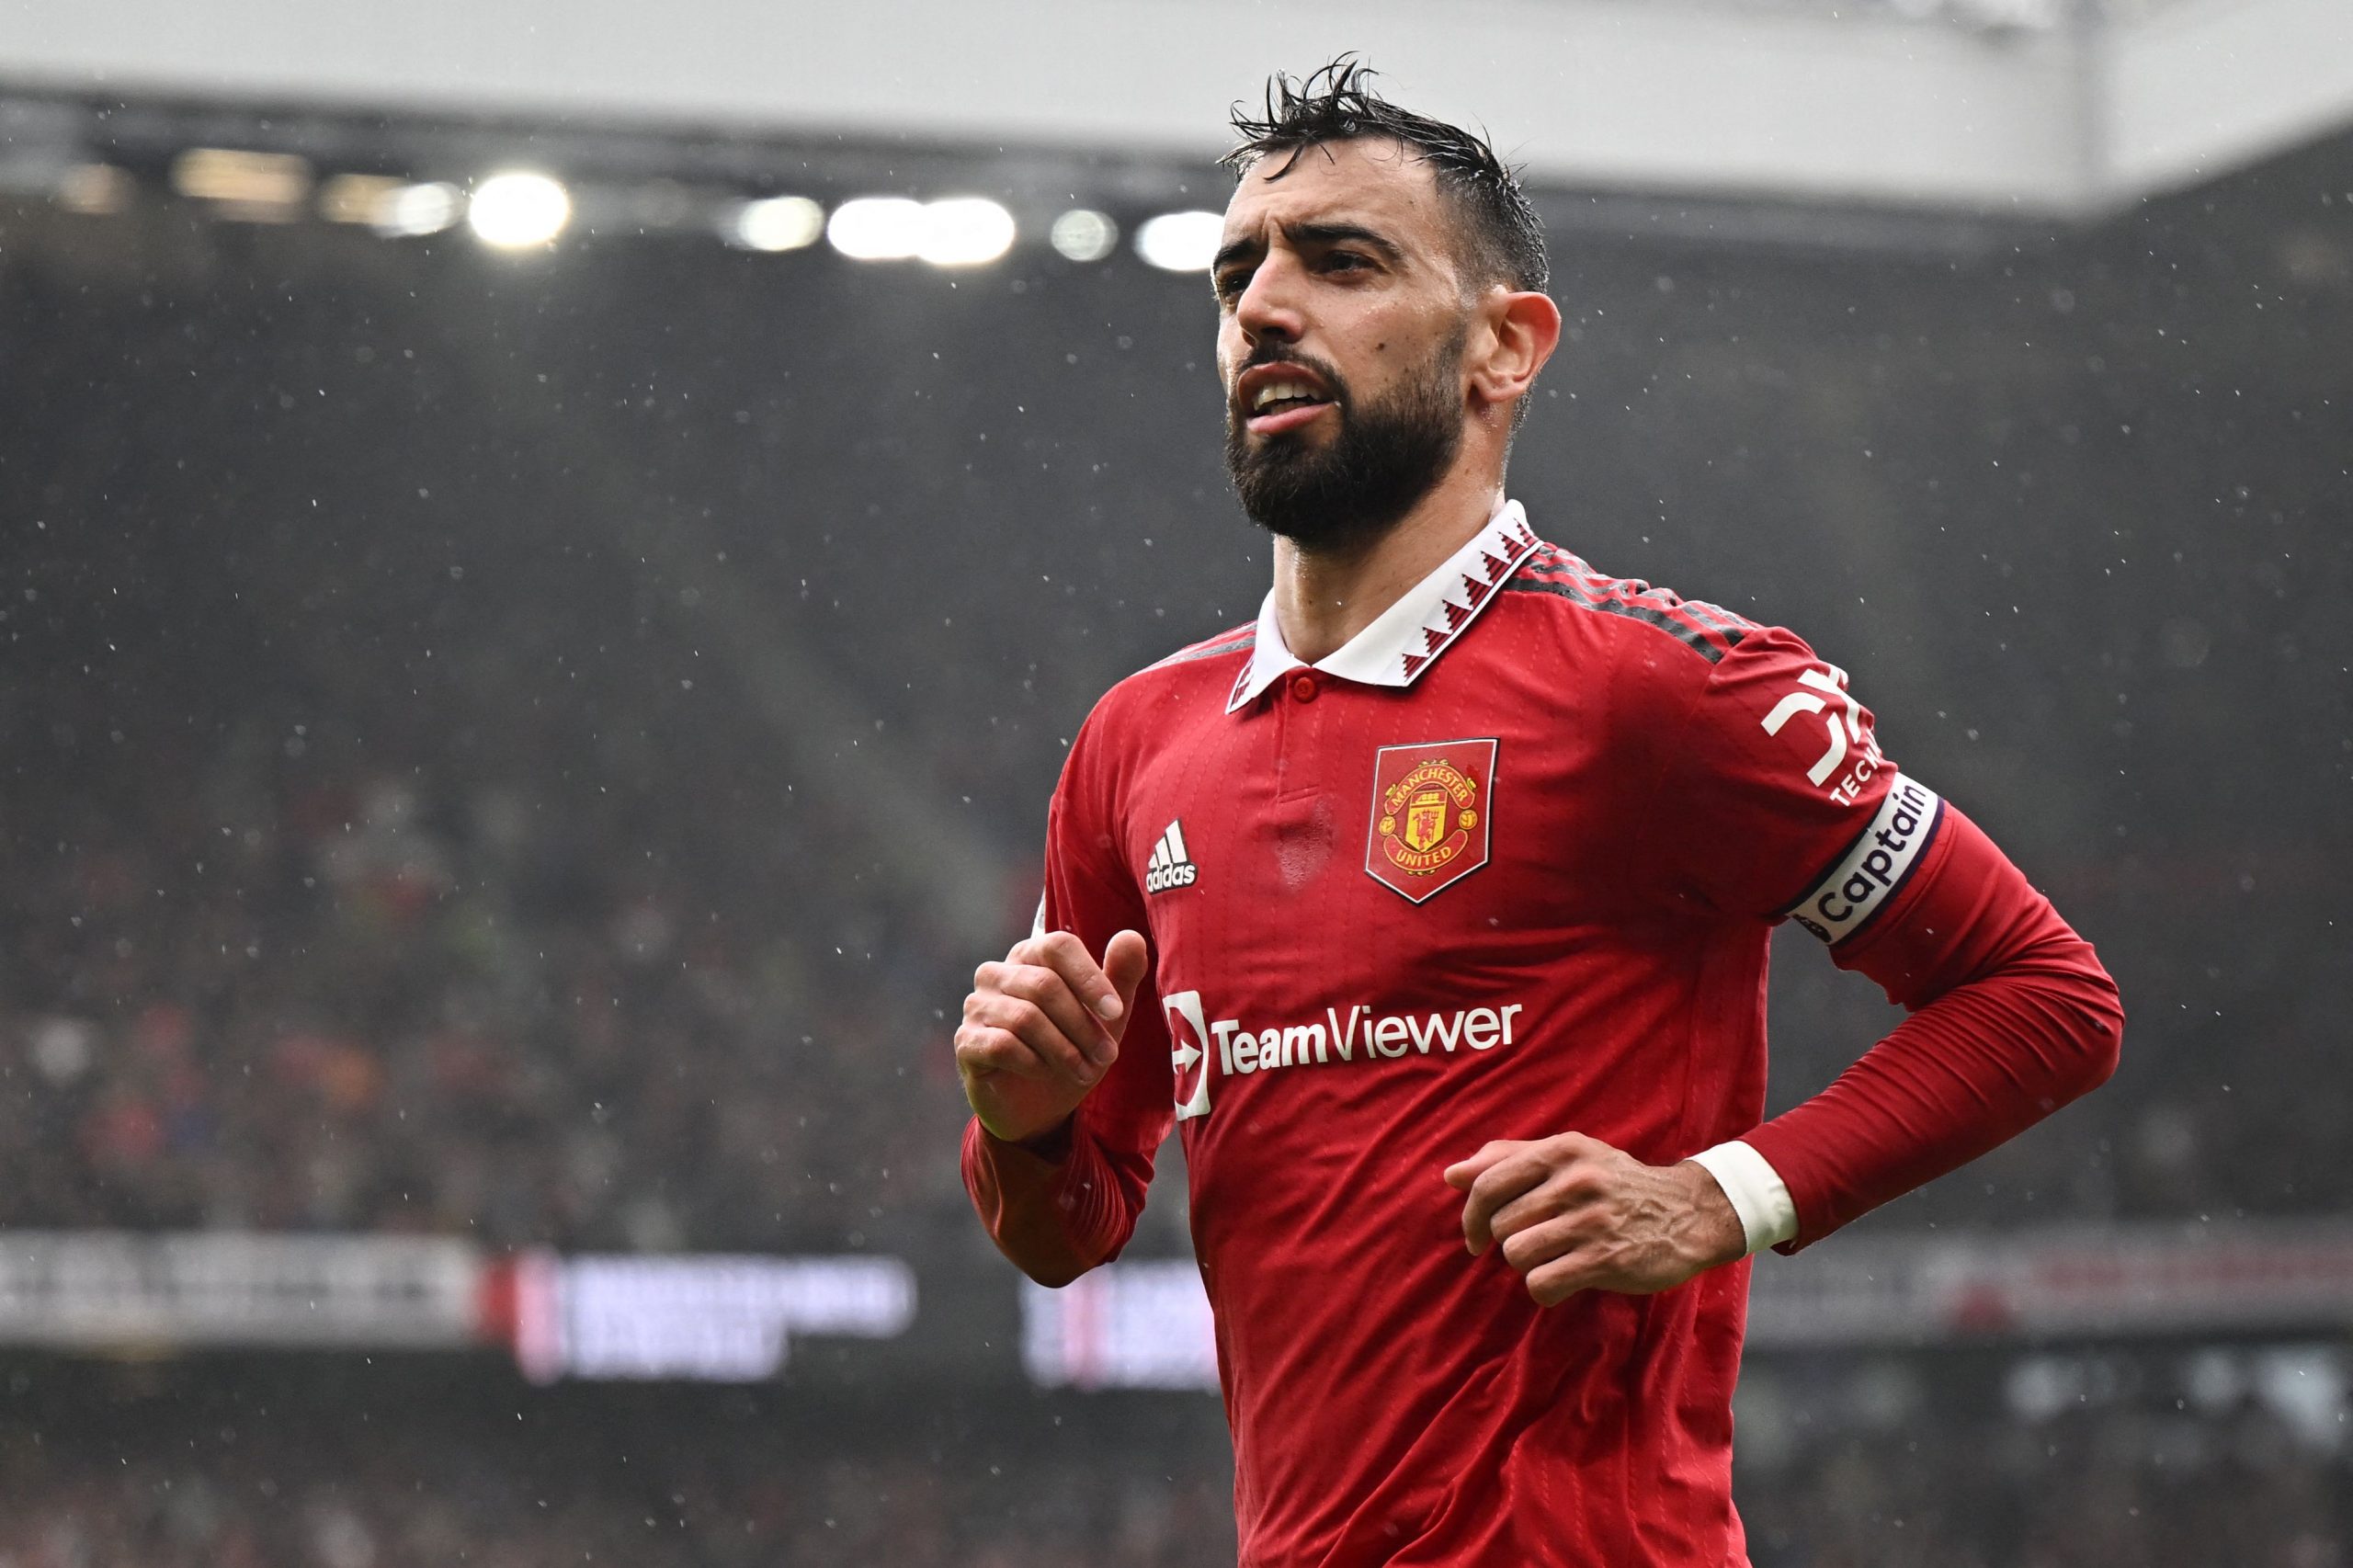 Portugal head coach Roberto Martinez spoke in detail about the importance of Manchester United captain Bruno Fernandes .